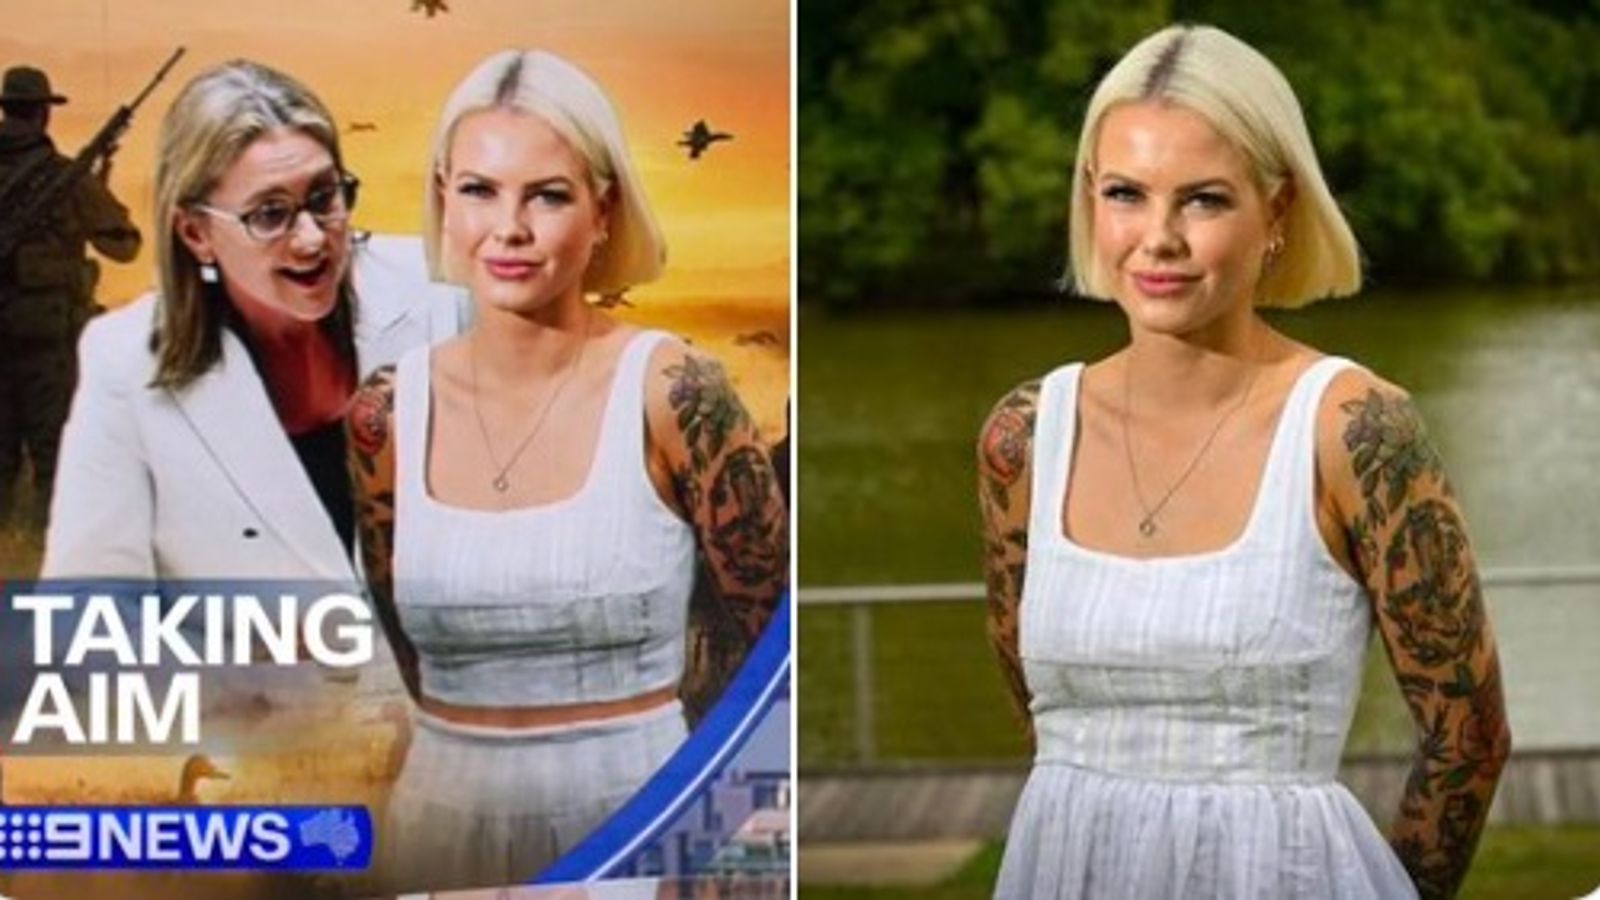 Australian news network apologises for 'graphic error' after photo of MP made more revealing